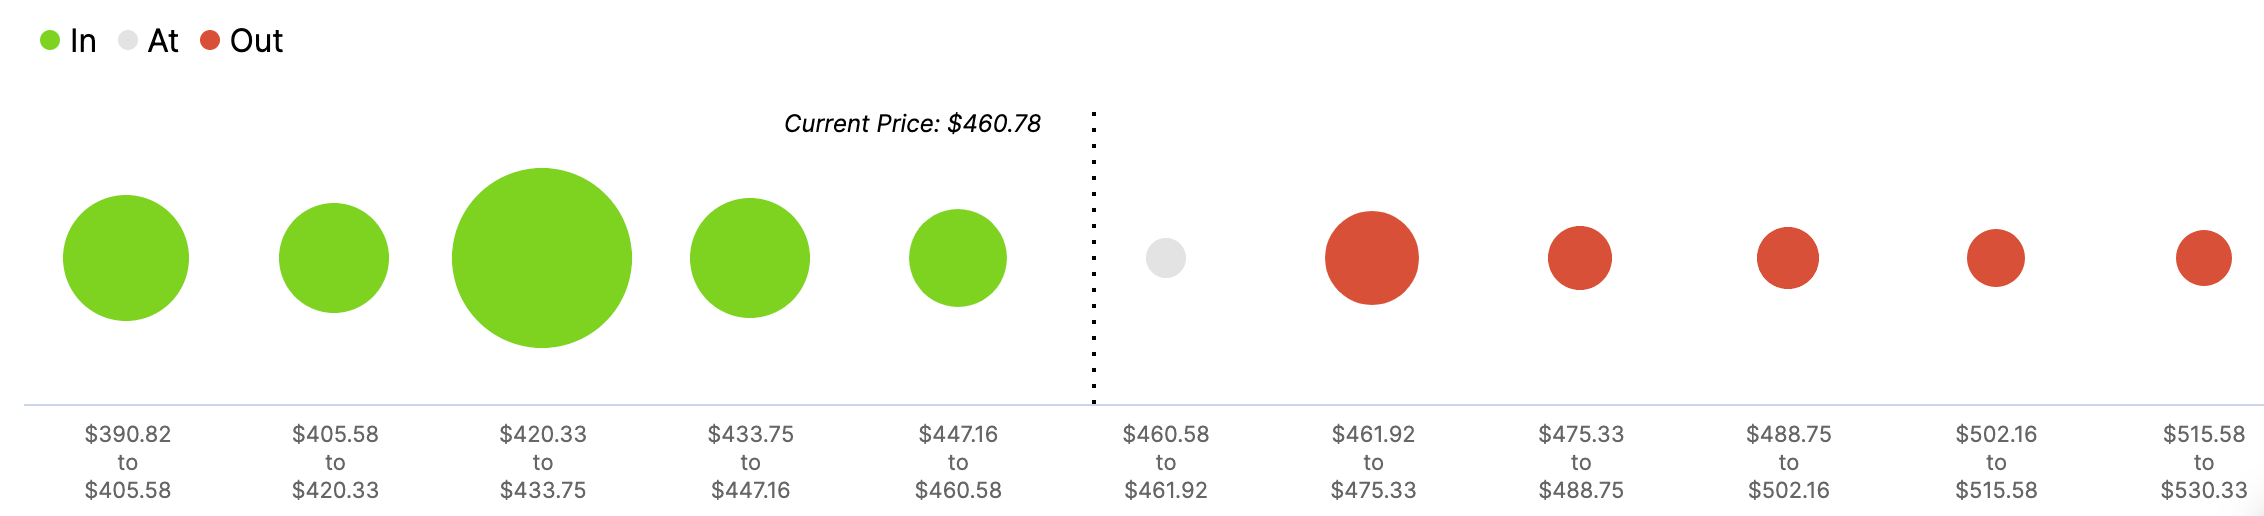 In/Out of the Money Around Price